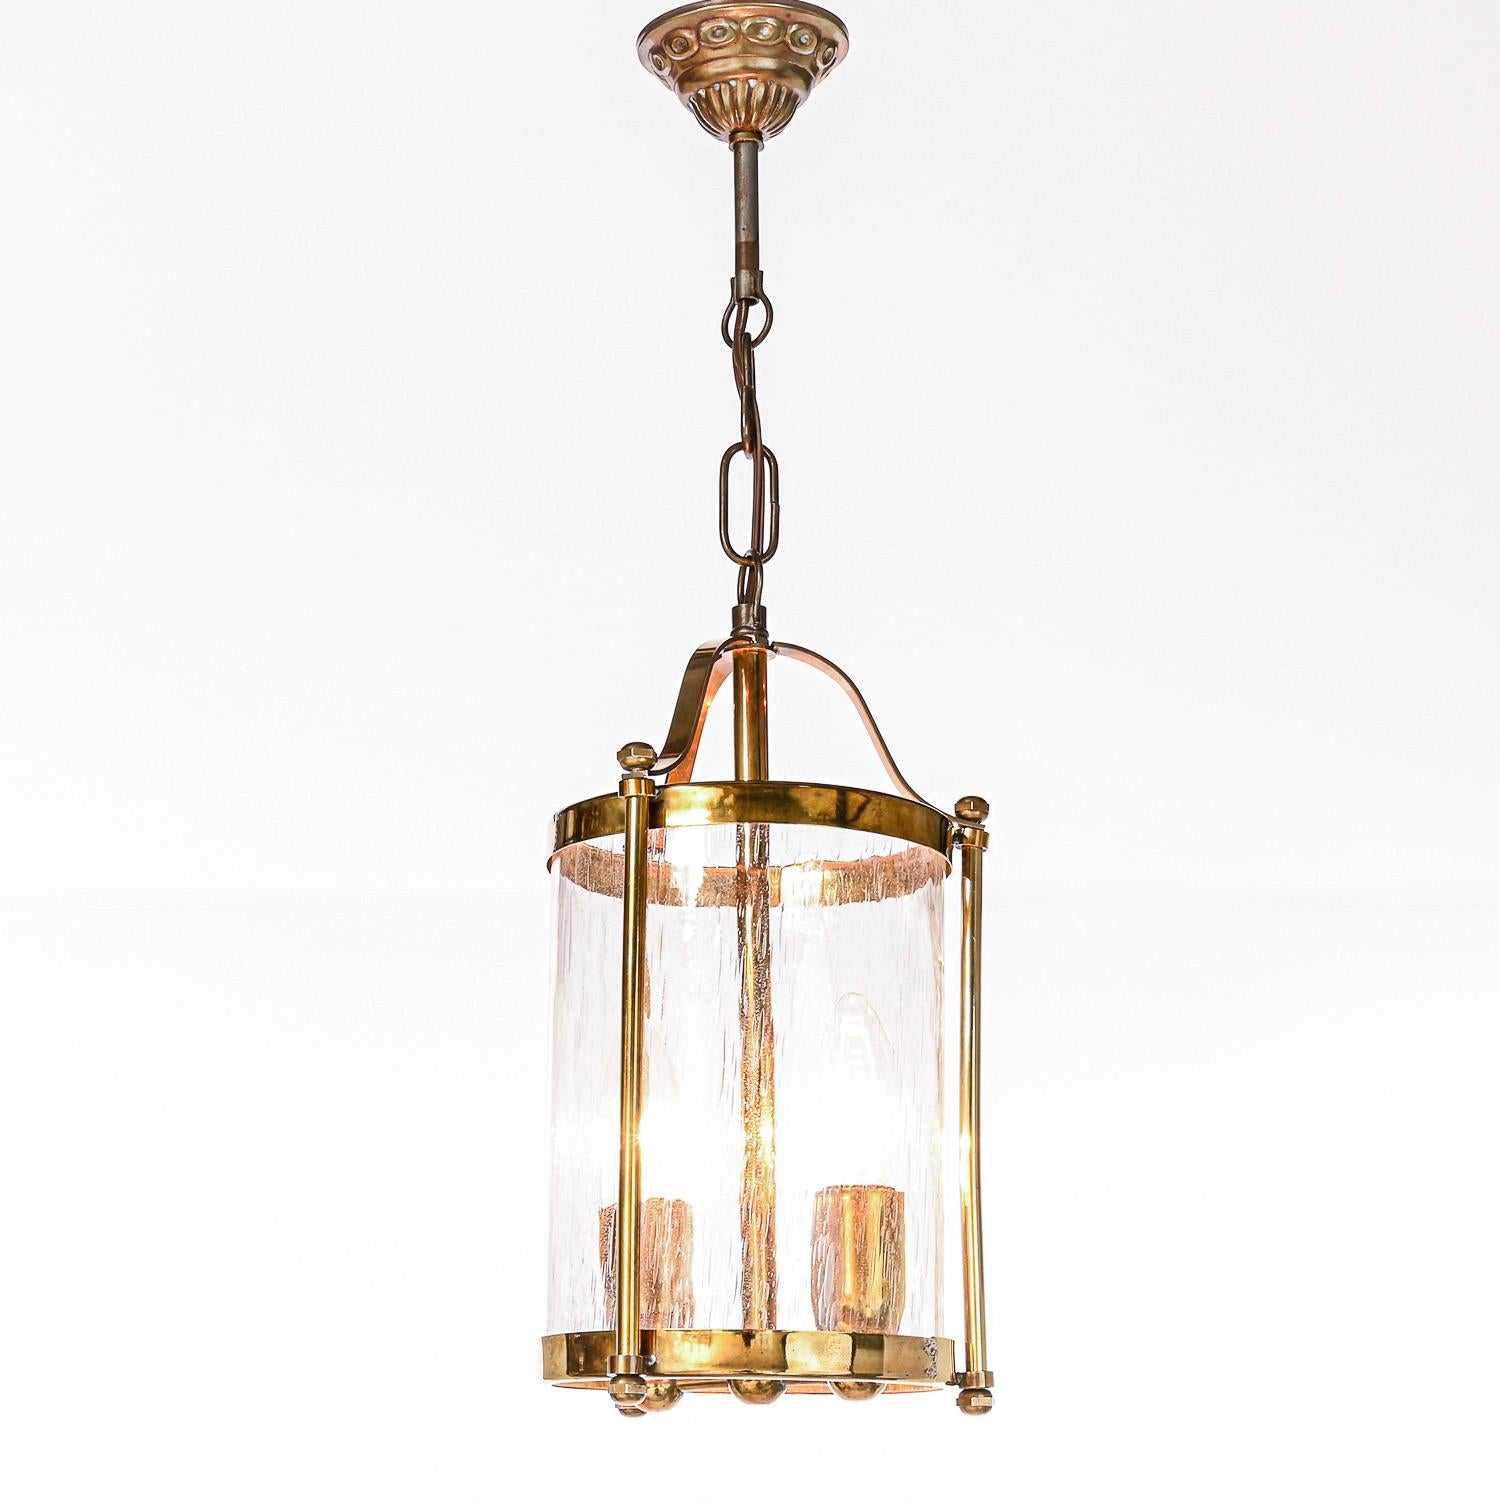 Early 20th Century Glass & Brass Lantern In Good Condition For Sale In Amsterdam, NH